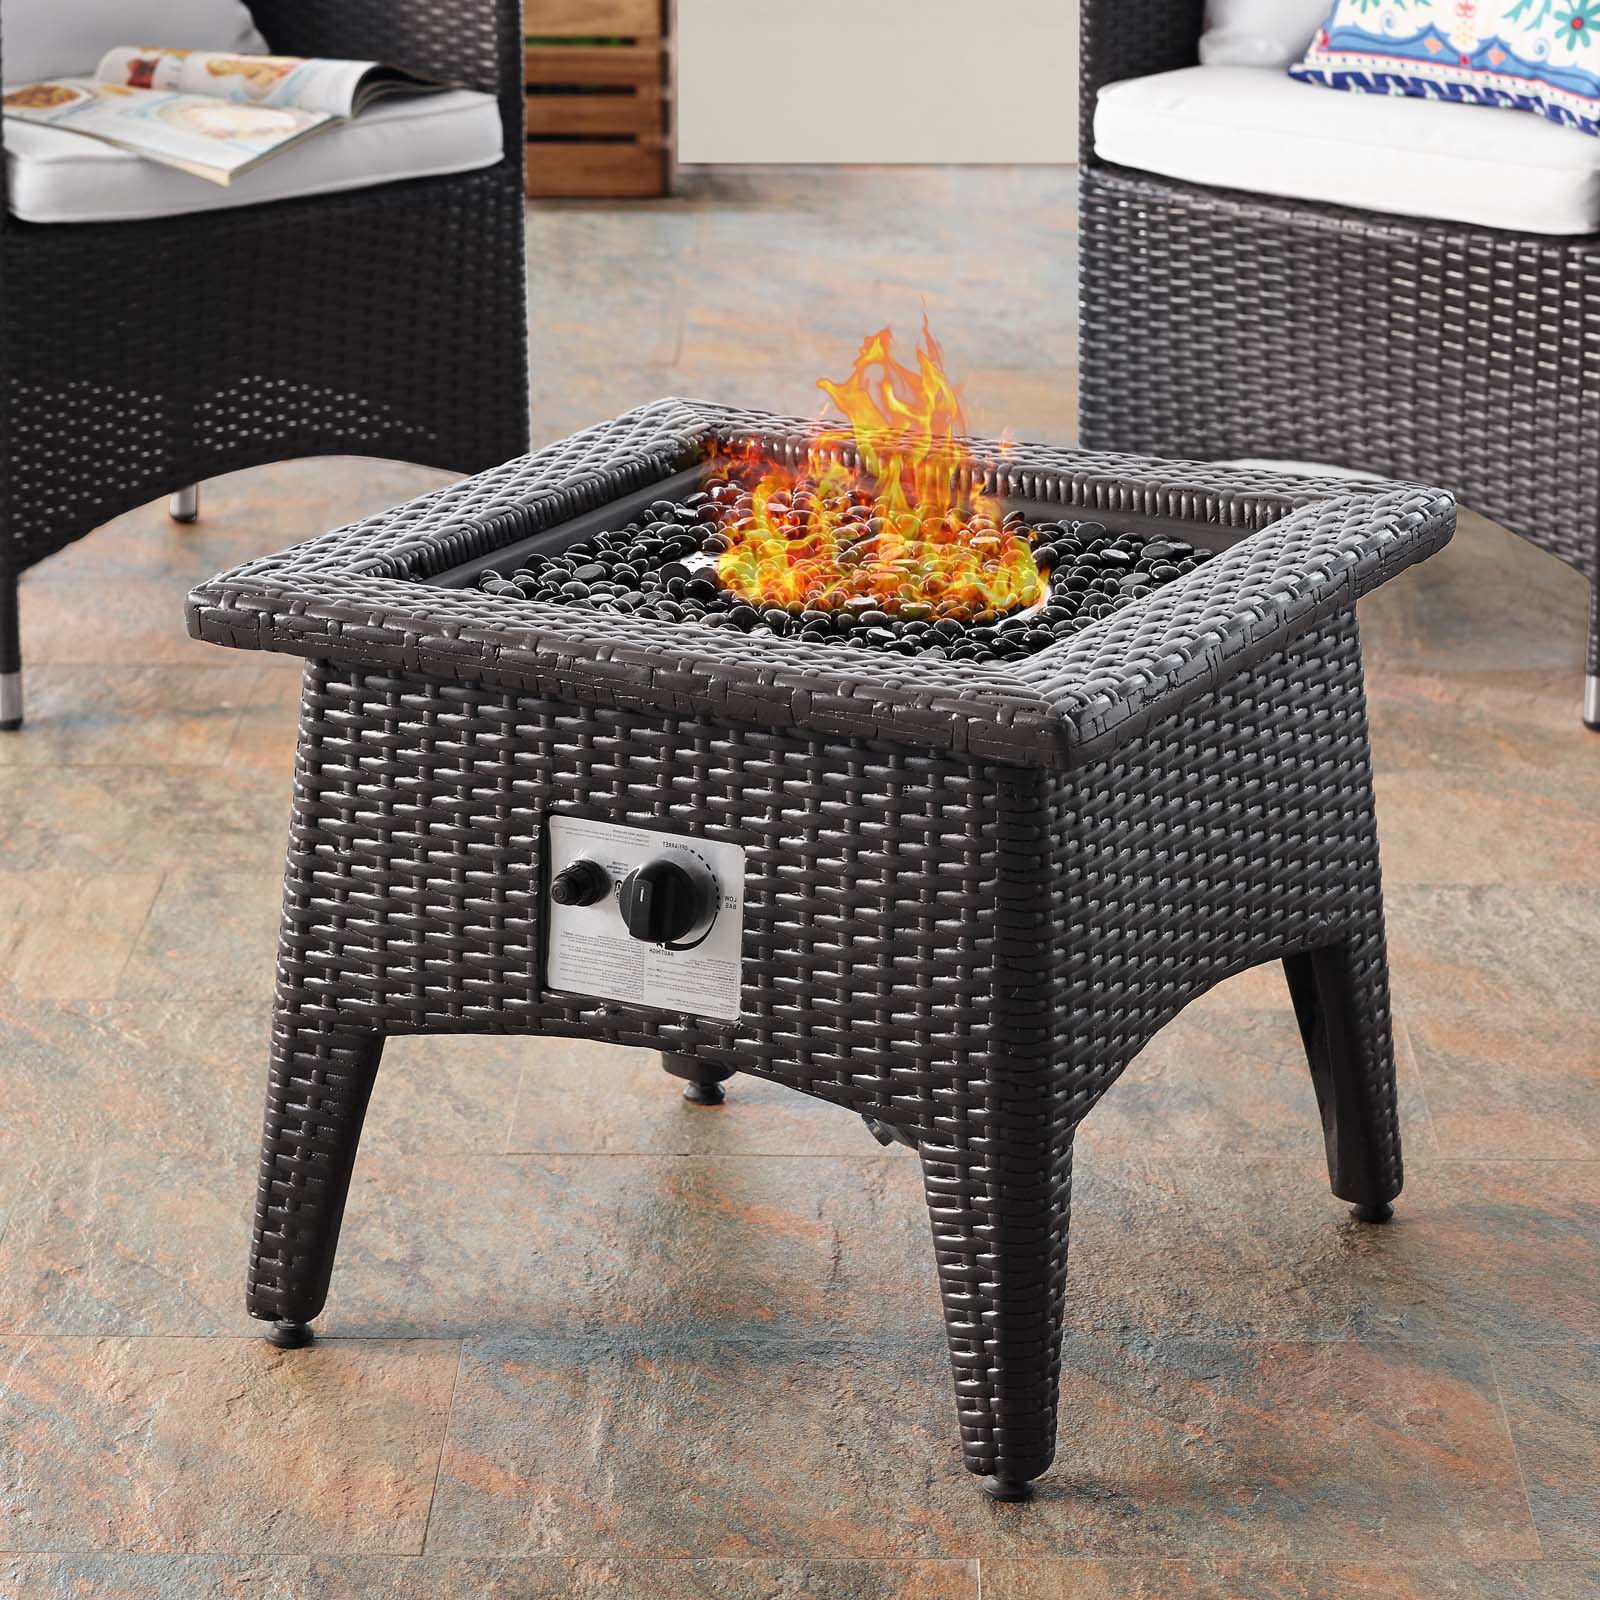 Contemporary Modern Urban Designer Outdoor Patio Balcony Garden Furniture Lounge Coffee Fire Pit Table and Chair Set, Fabric Rattan Wicker, White - image 2 of 8